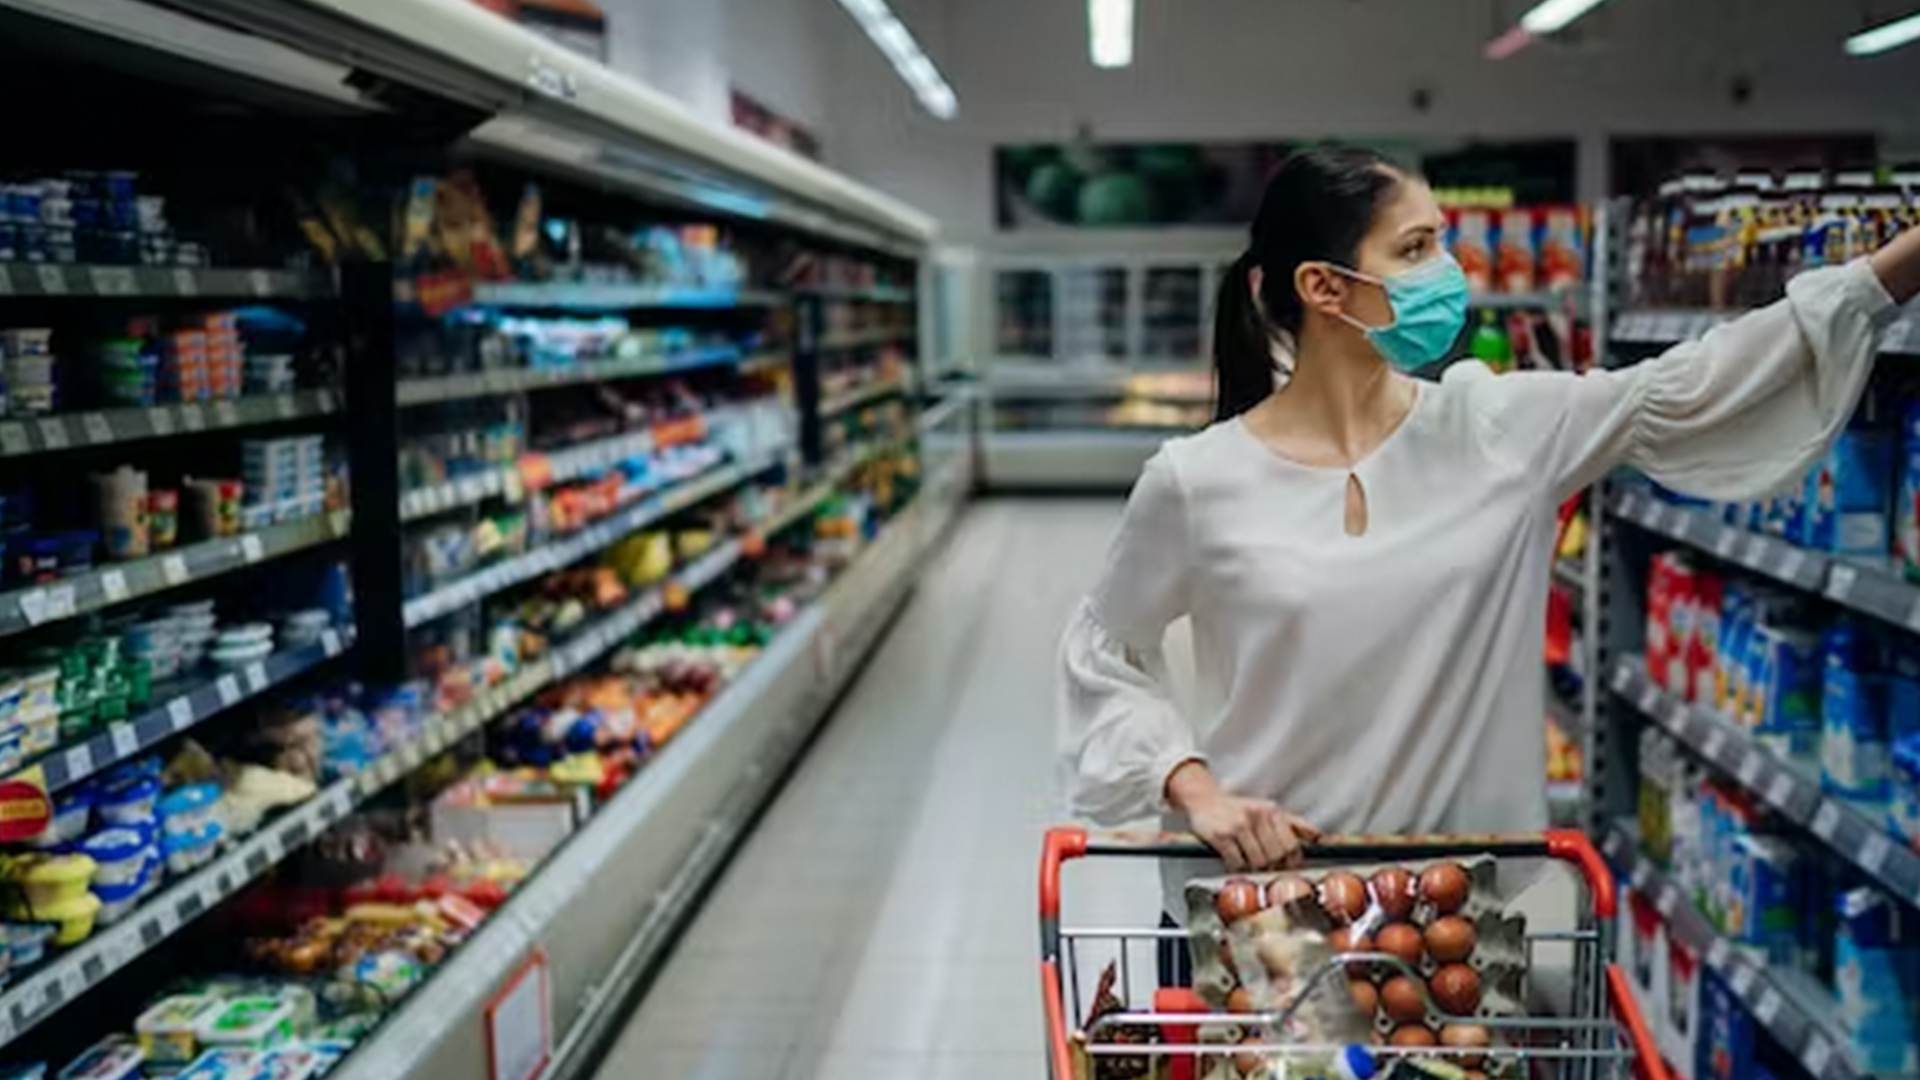 Woman in a blue face mask shops in a grocery store.